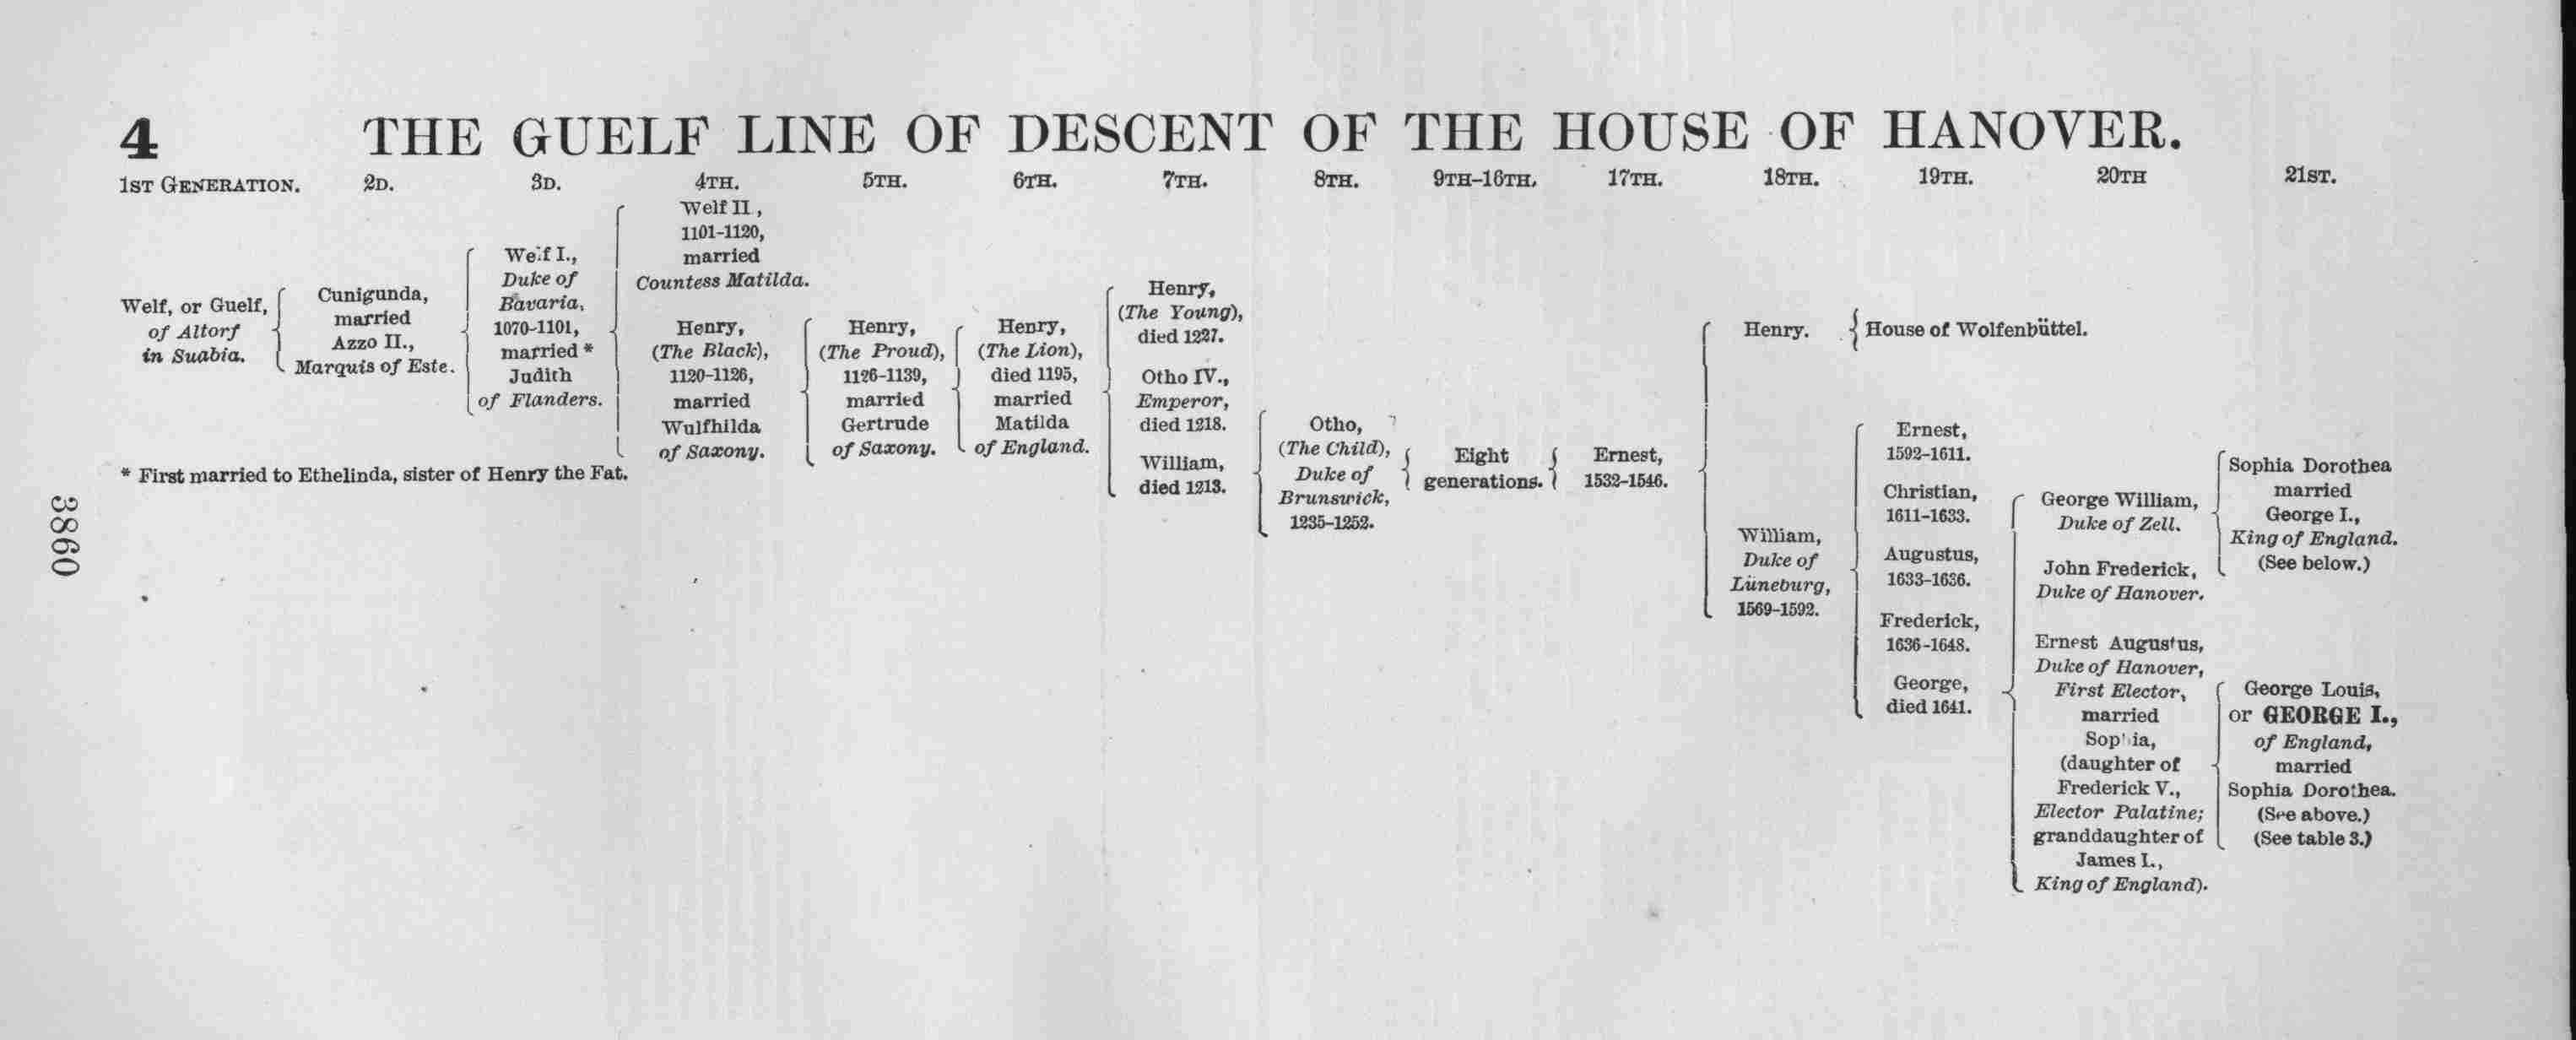 THE GUELF LINE OF DESCENT OF THE HOUSE OF HANOVER